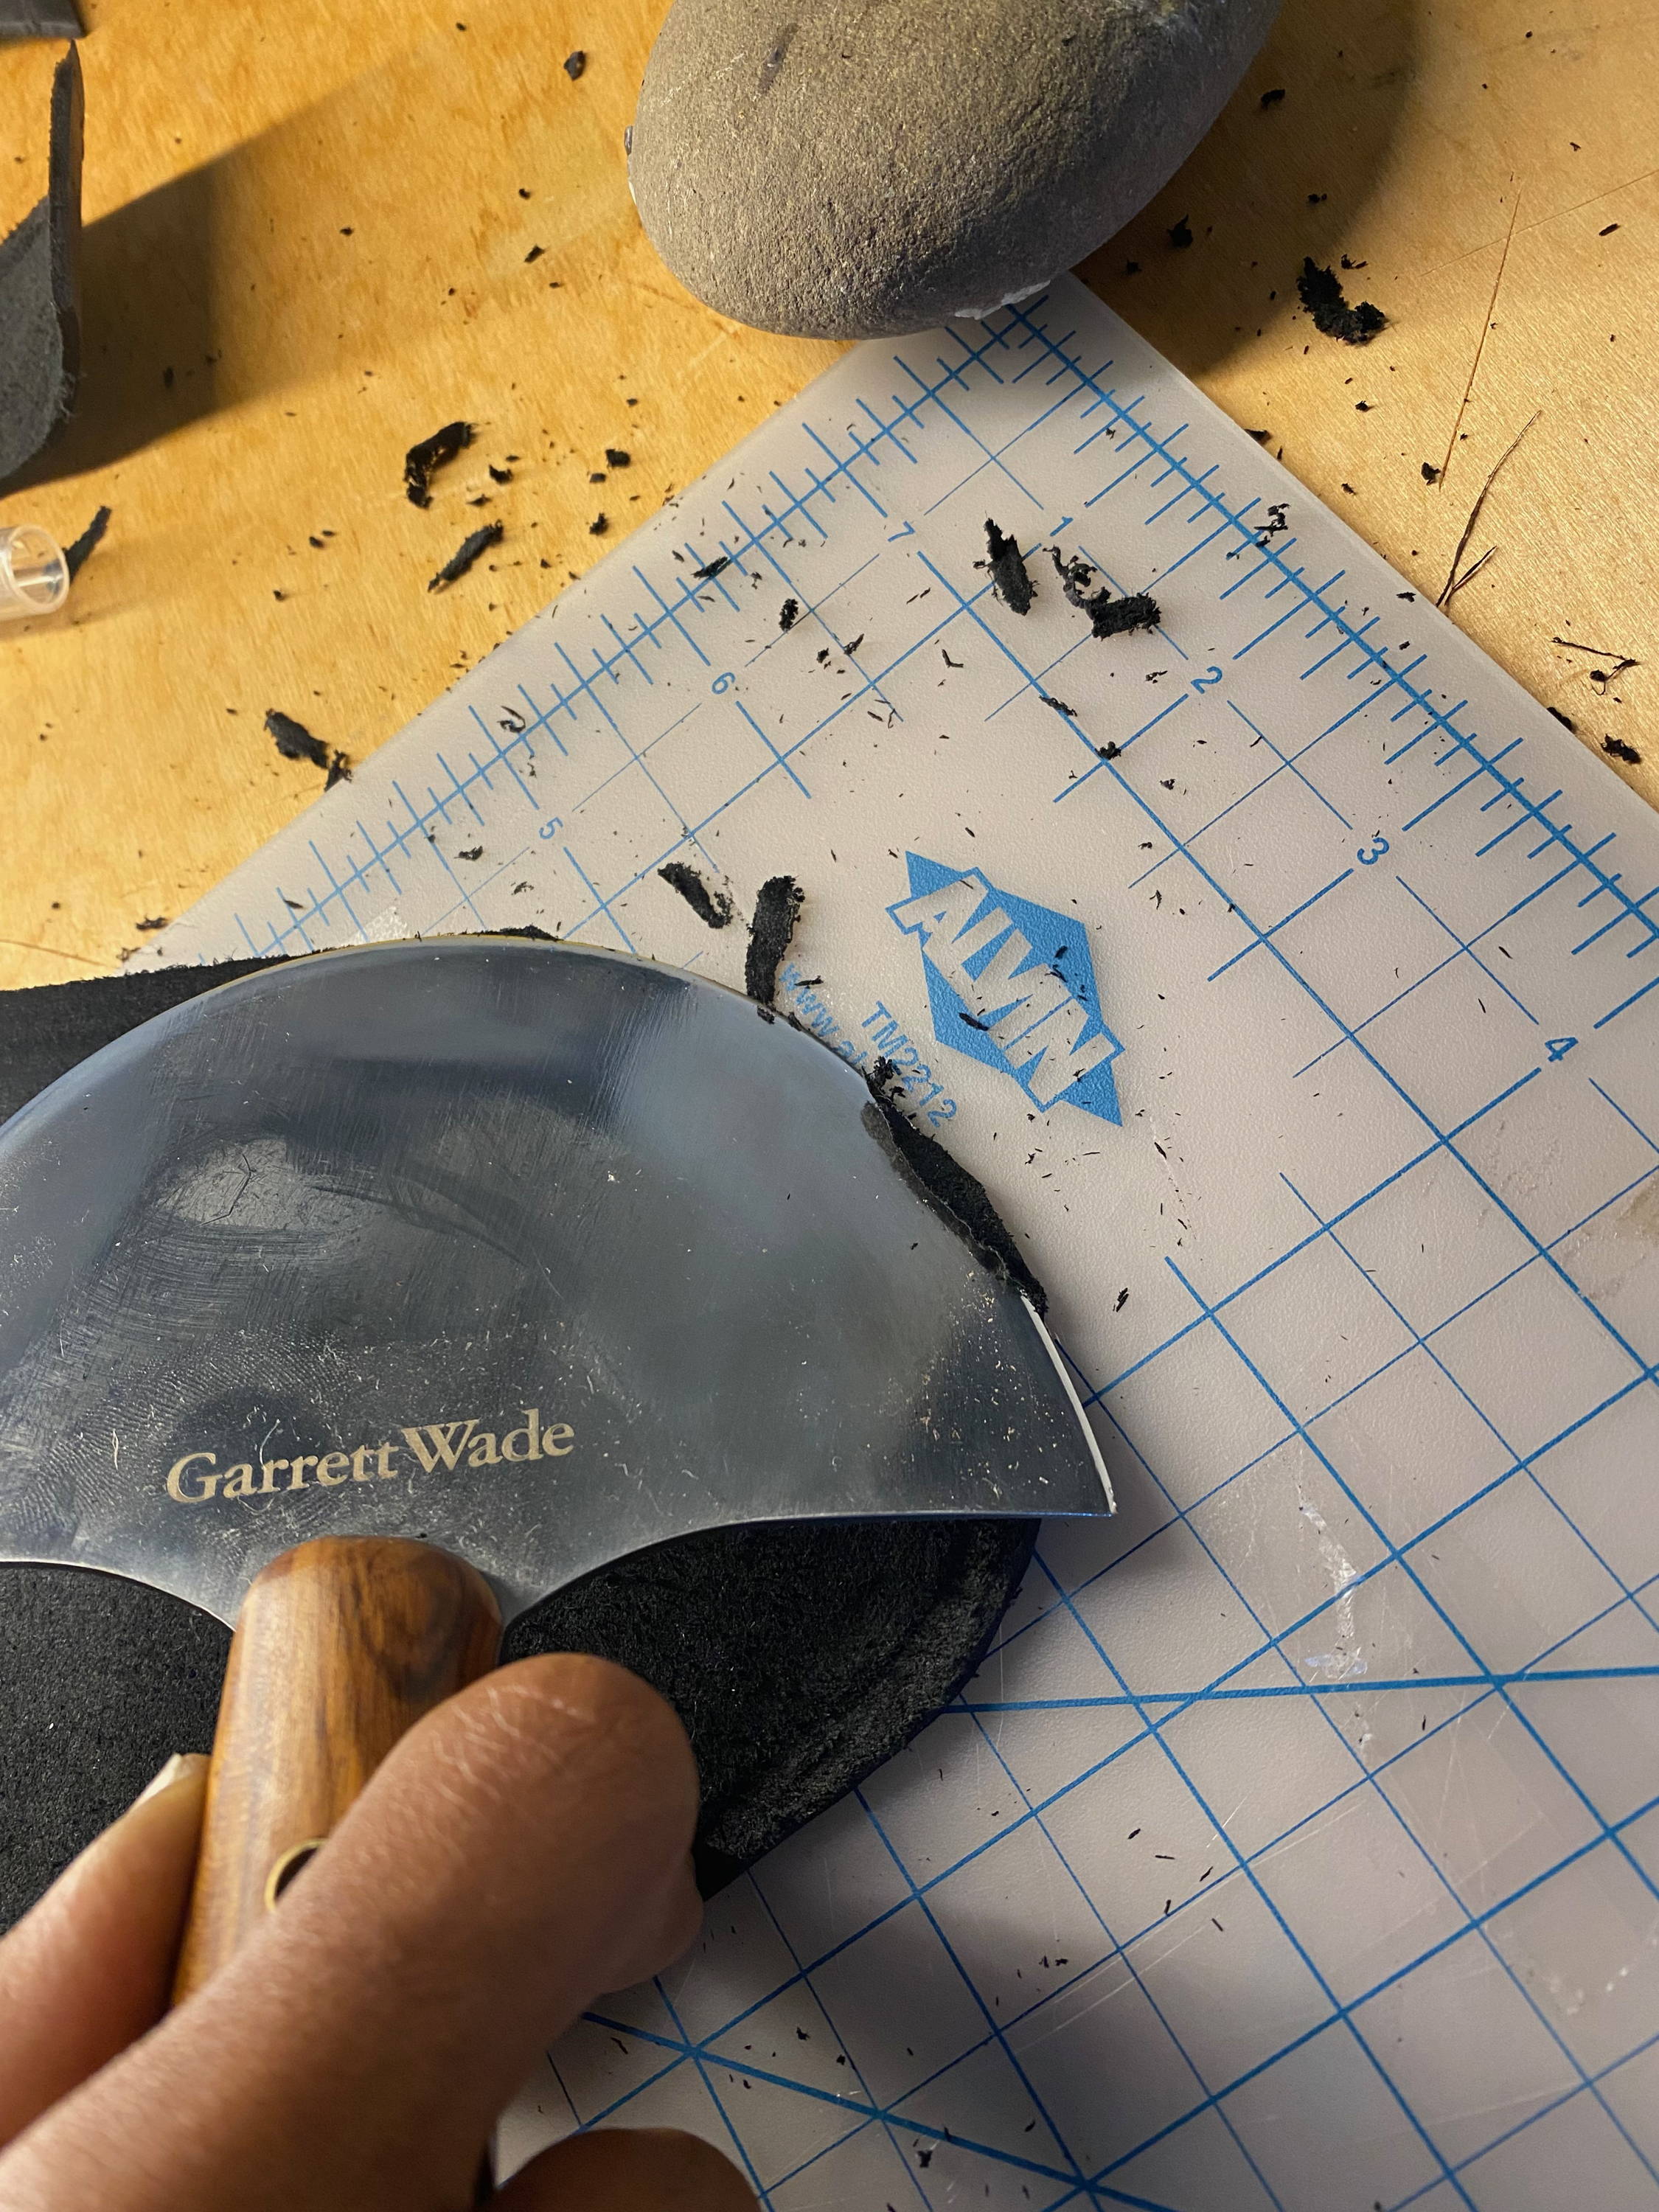 Leather Permitting: Your First Leathercraft Project - Garrett Wade